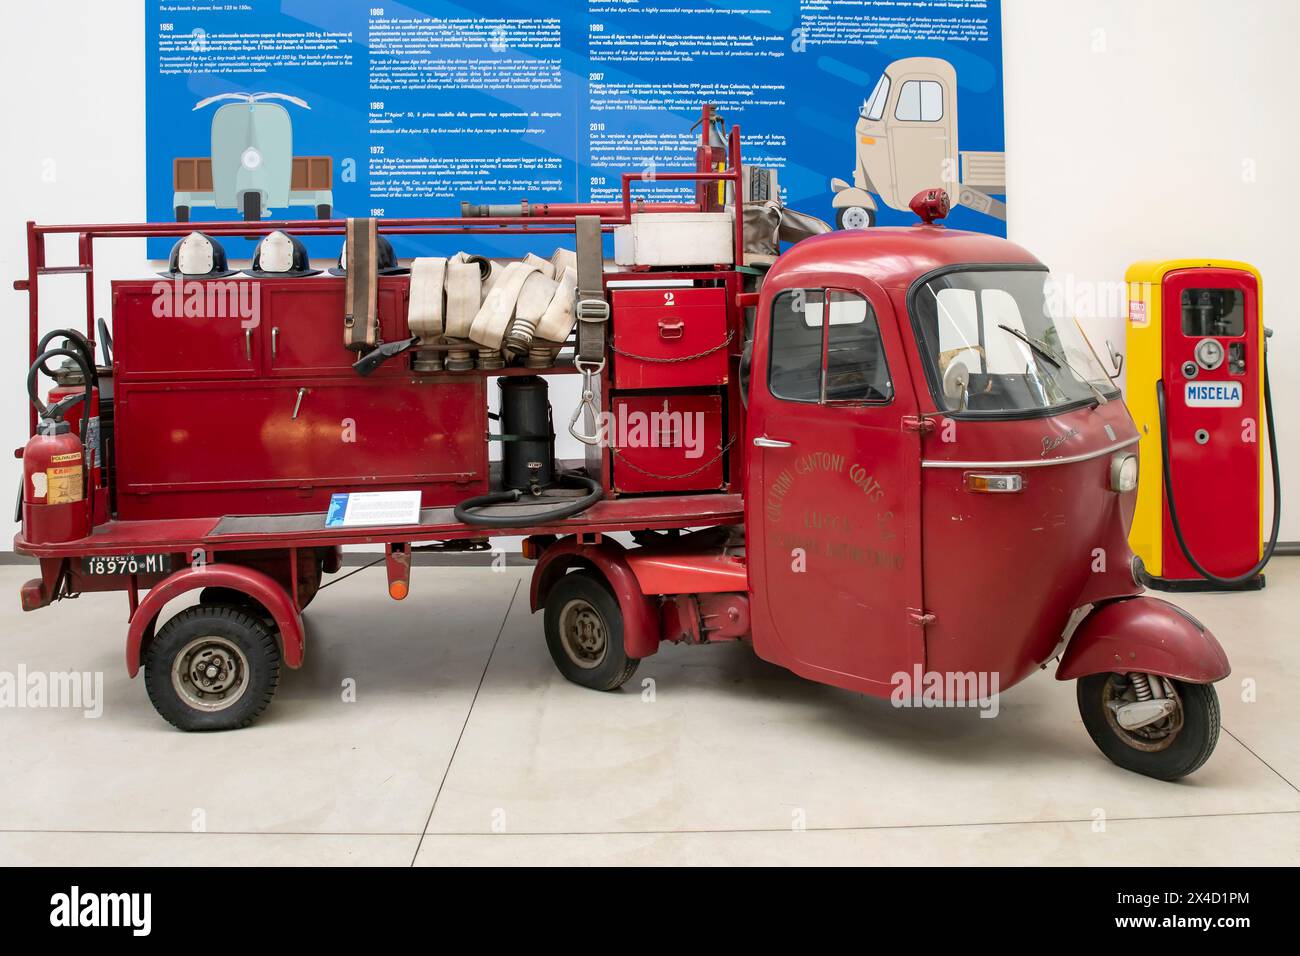 A Pentaro Ape of the 60s used by the firefighters on display at the Piaggio Museum of Pontedera, Italy Stock Photo